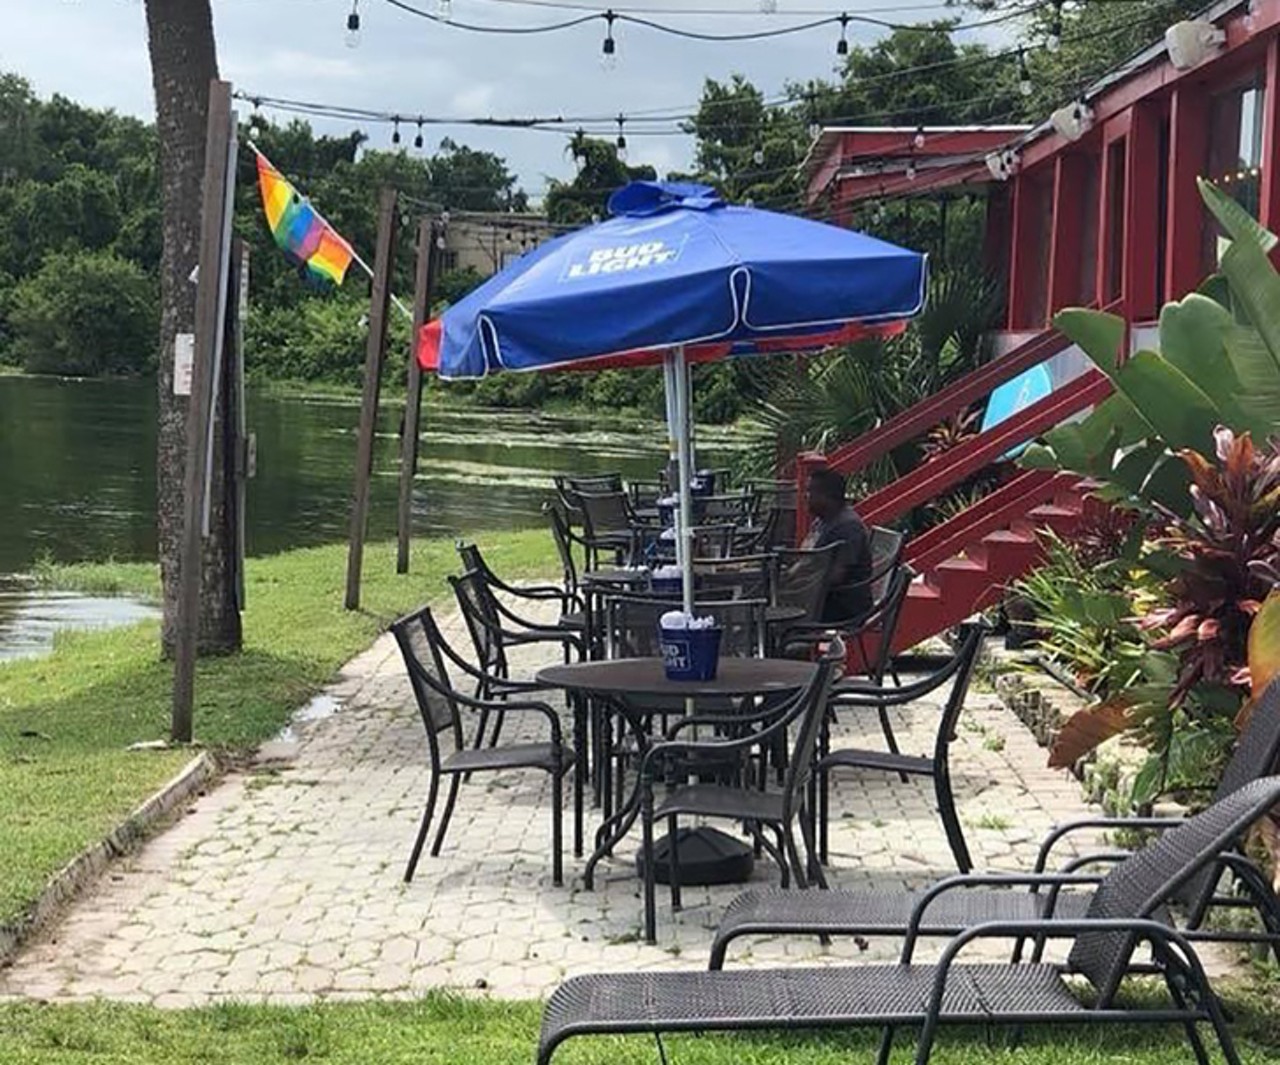 The Waterfront
4201 S Orange Ave., 407-866-0468
The Waterfront's patio is all about classic Florida charm, and the waterfront view can't be beat.
Photo via The Waterfront/Facebook